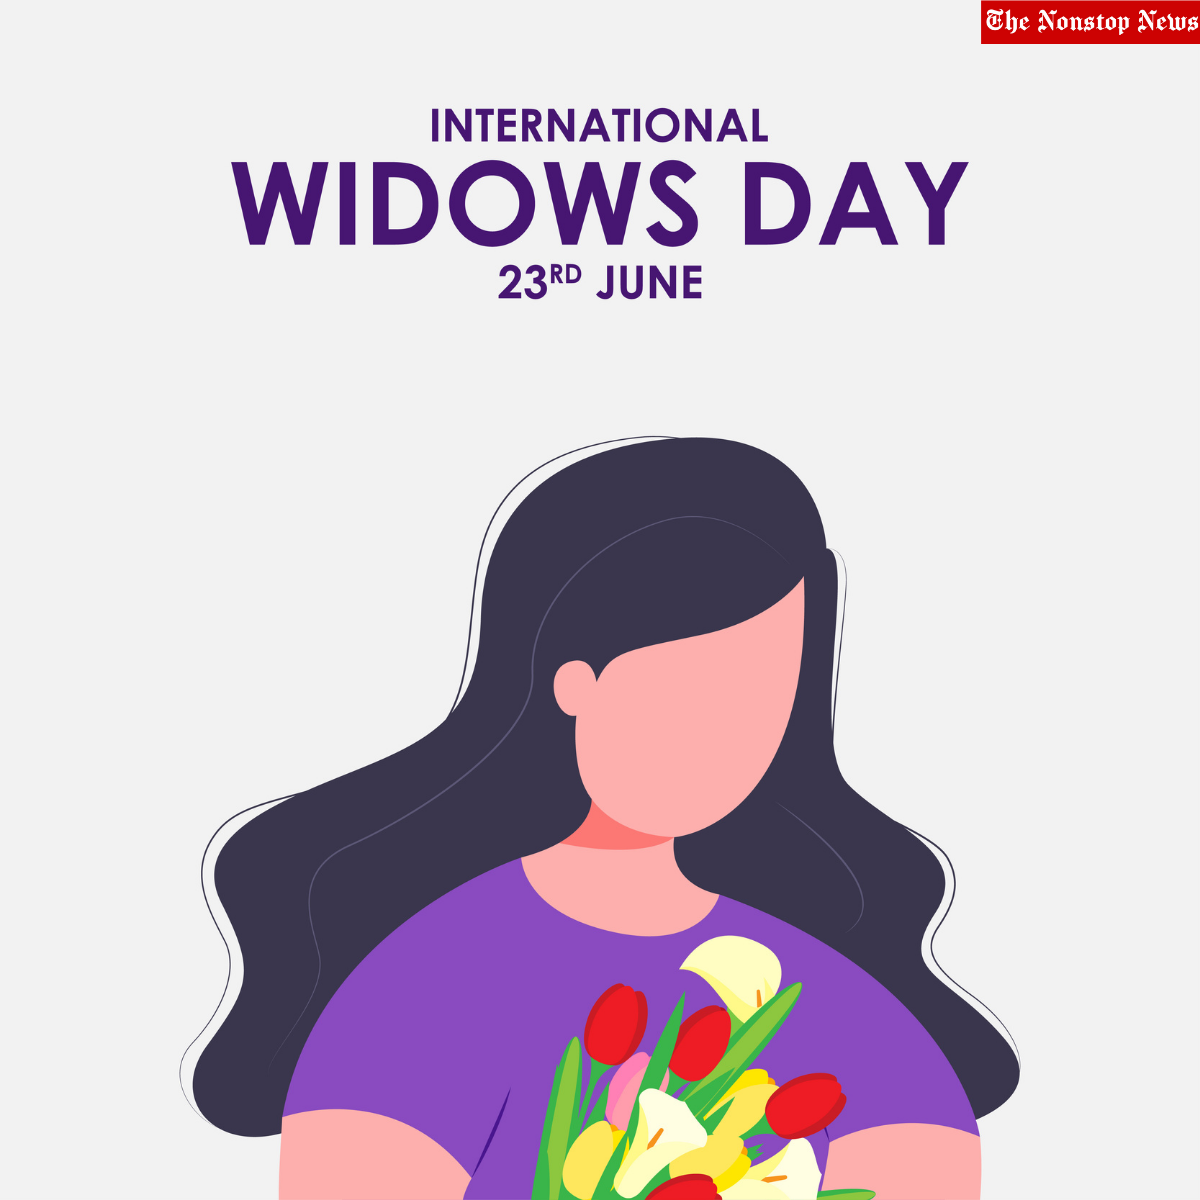 International Widows Day 2022: Quotes, Images, Messages, Slogans, Banners, and Posters to Create Awareness